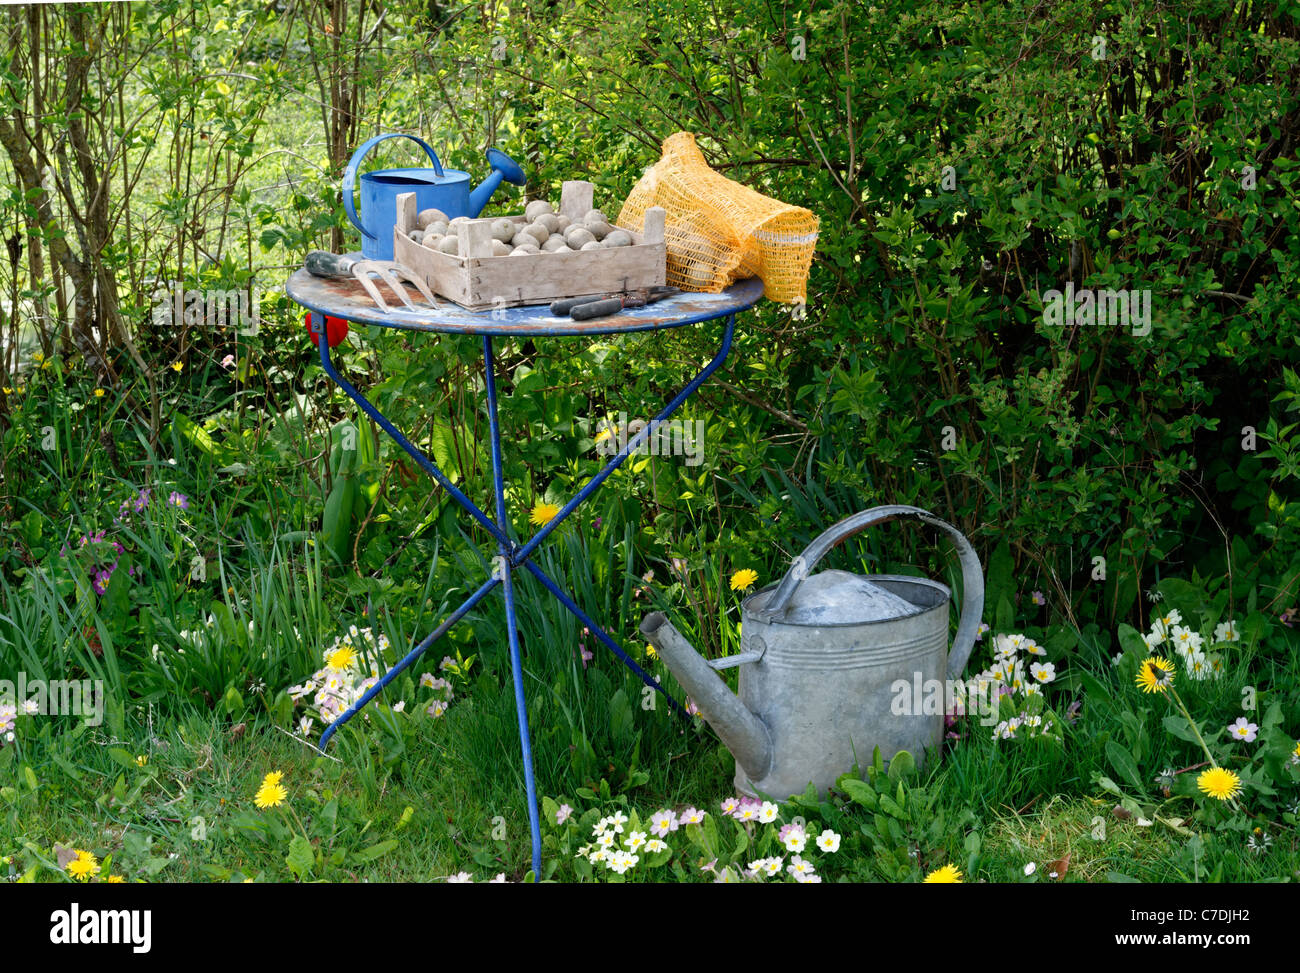 Potatoes (Solanum tuberosum) to be planted on the garden table and zinc watering can. Stock Photo